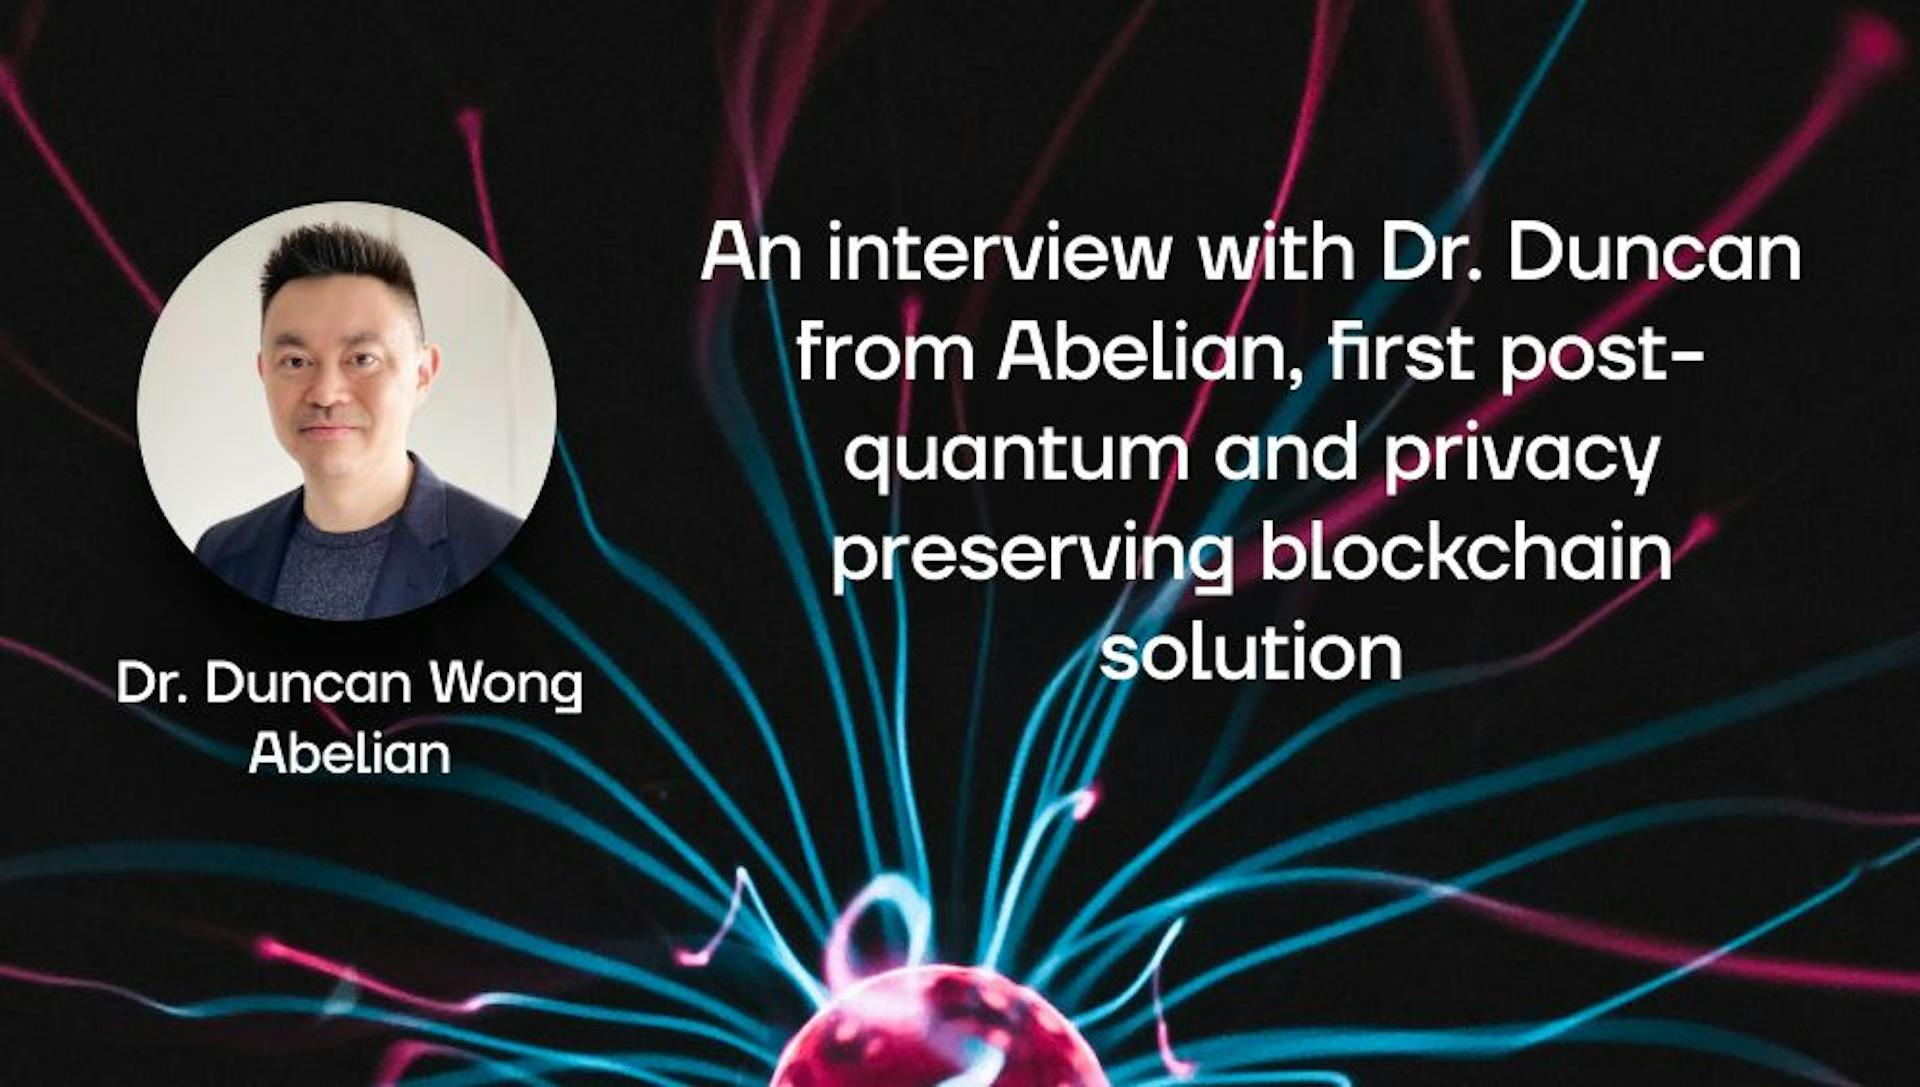 featured image - Abelian CEO Expects Quantum-Resistant Blockchains to be the 'Only Survivors' in 5-10 Years